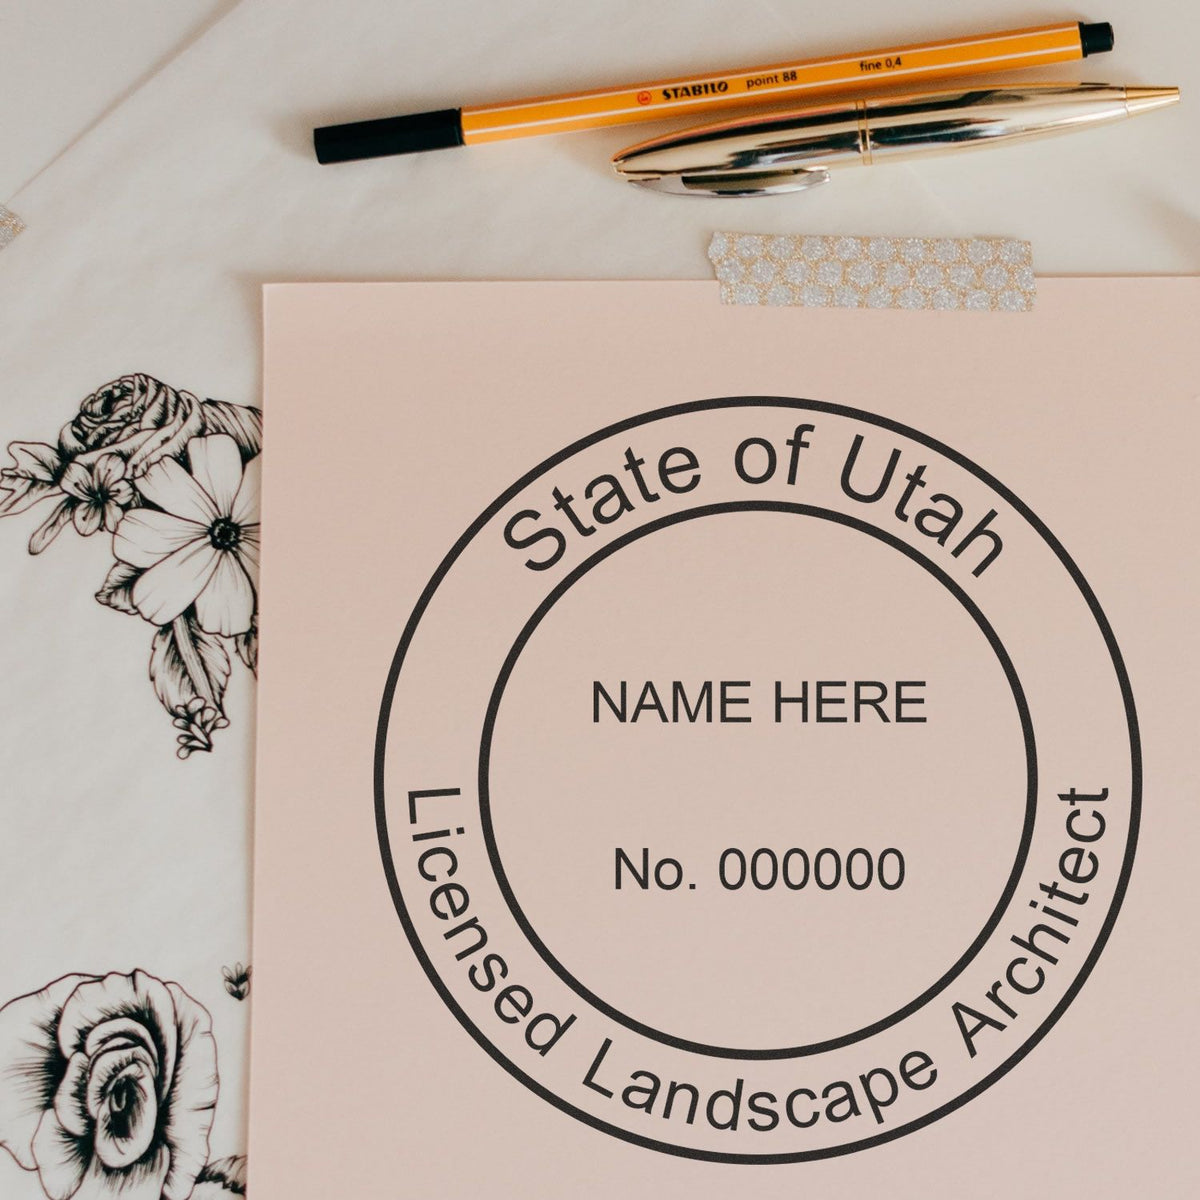 An alternative view of the Slim Pre-Inked Utah Landscape Architect Seal Stamp stamped on a sheet of paper showing the image in use